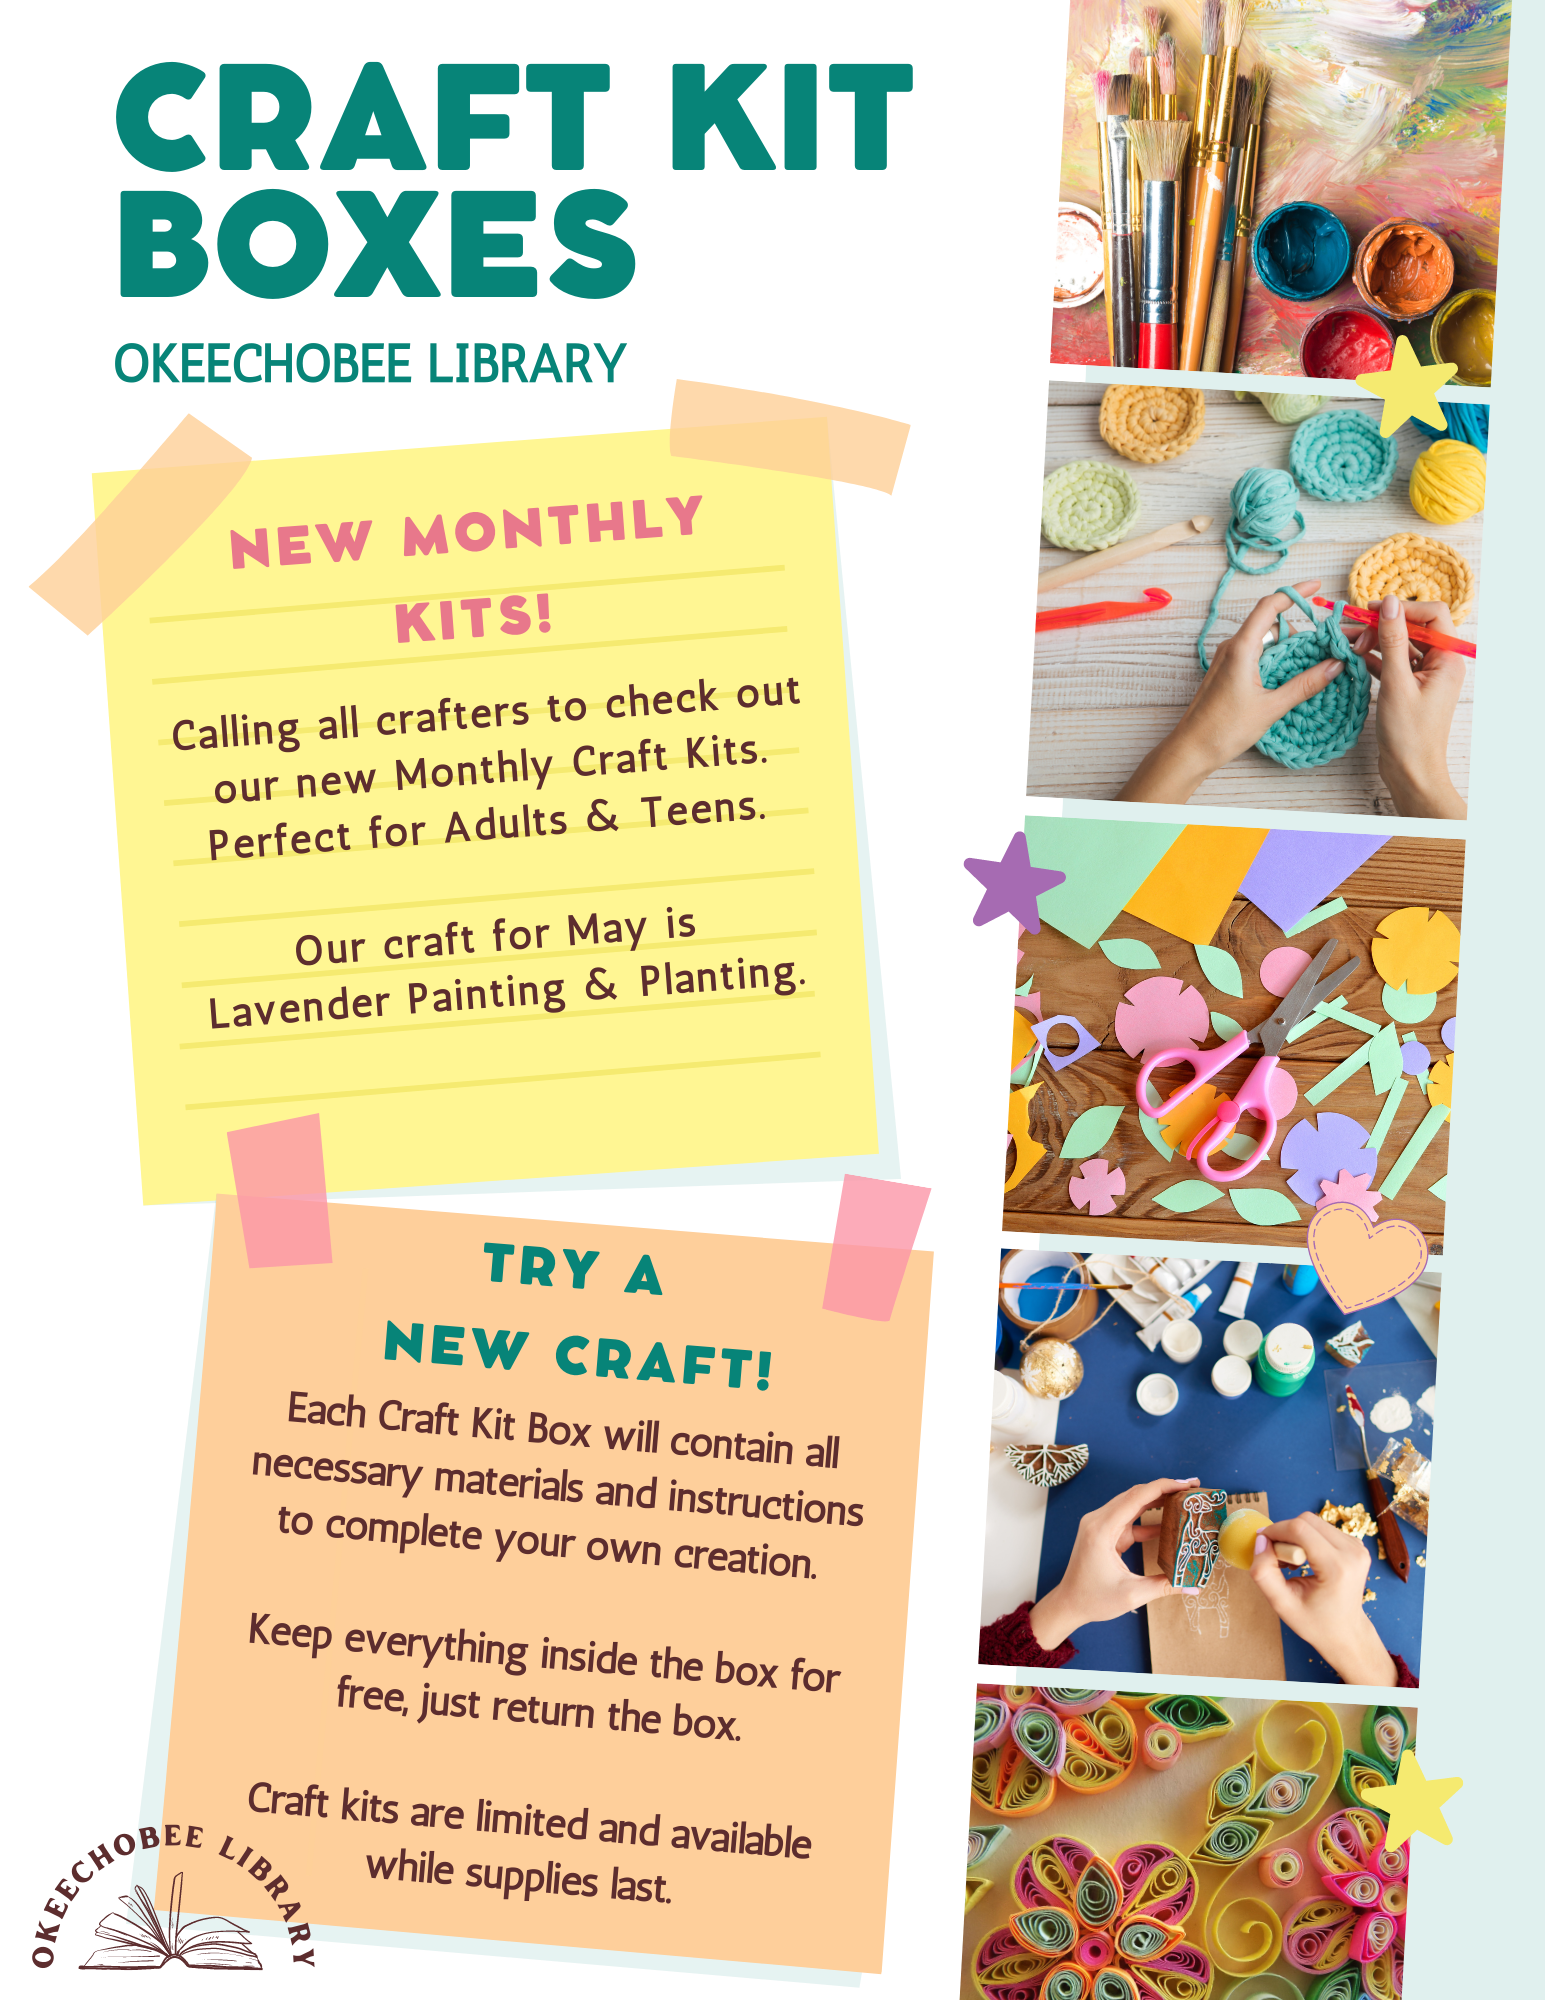 Calling all crafters to check out our May Monthly Craft Kits. Perfect for Adults & Teens. Our craft for May is a Lavender Painting & Planting. Each Craft Kit Box will contain all necessary materials and instructions to complete your own creation.